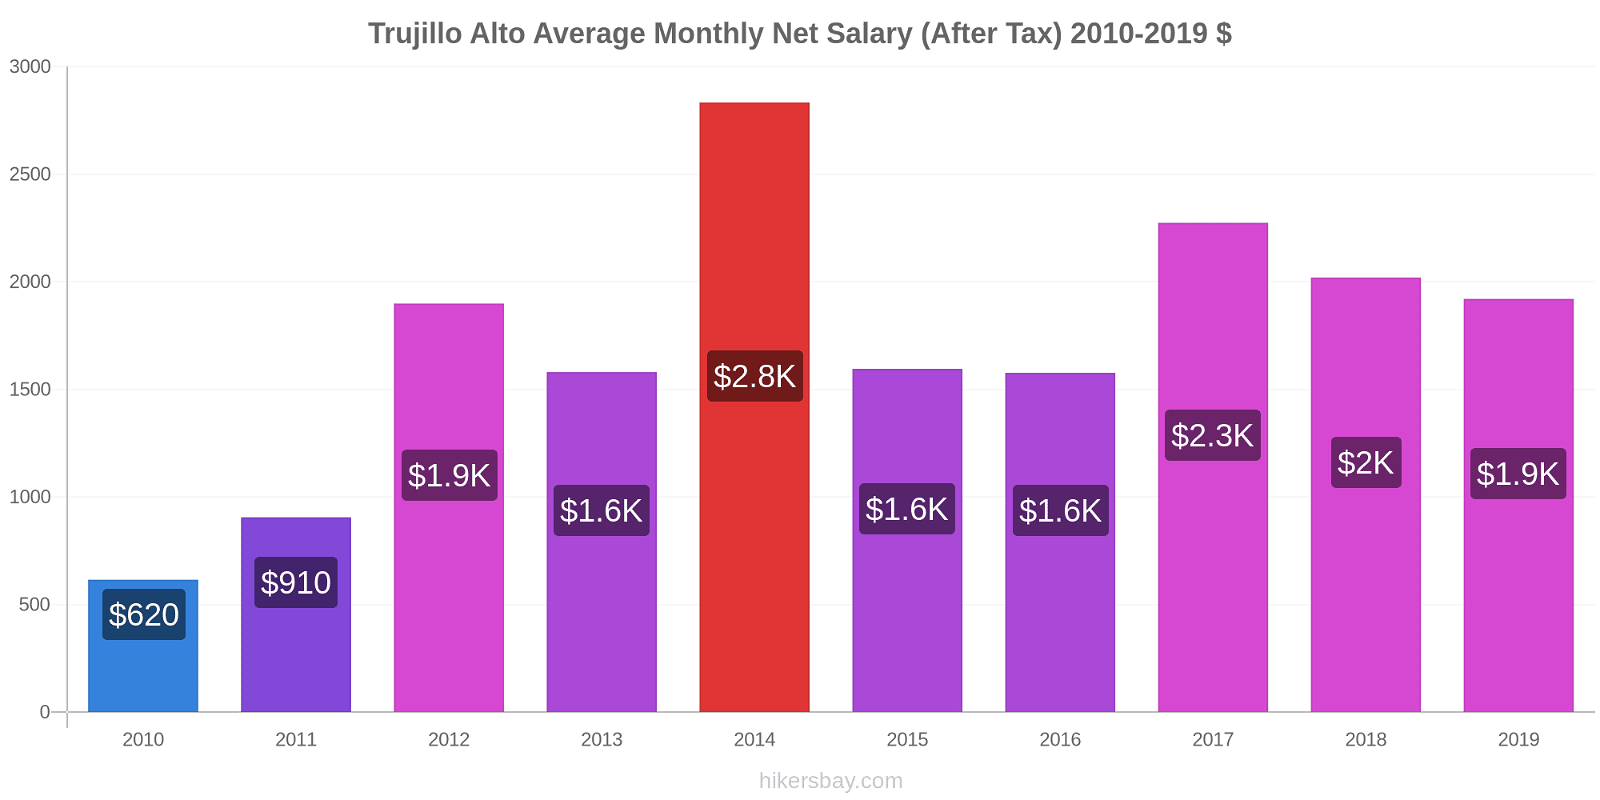 Trujillo Alto price changes Average Monthly Net Salary (After Tax) hikersbay.com